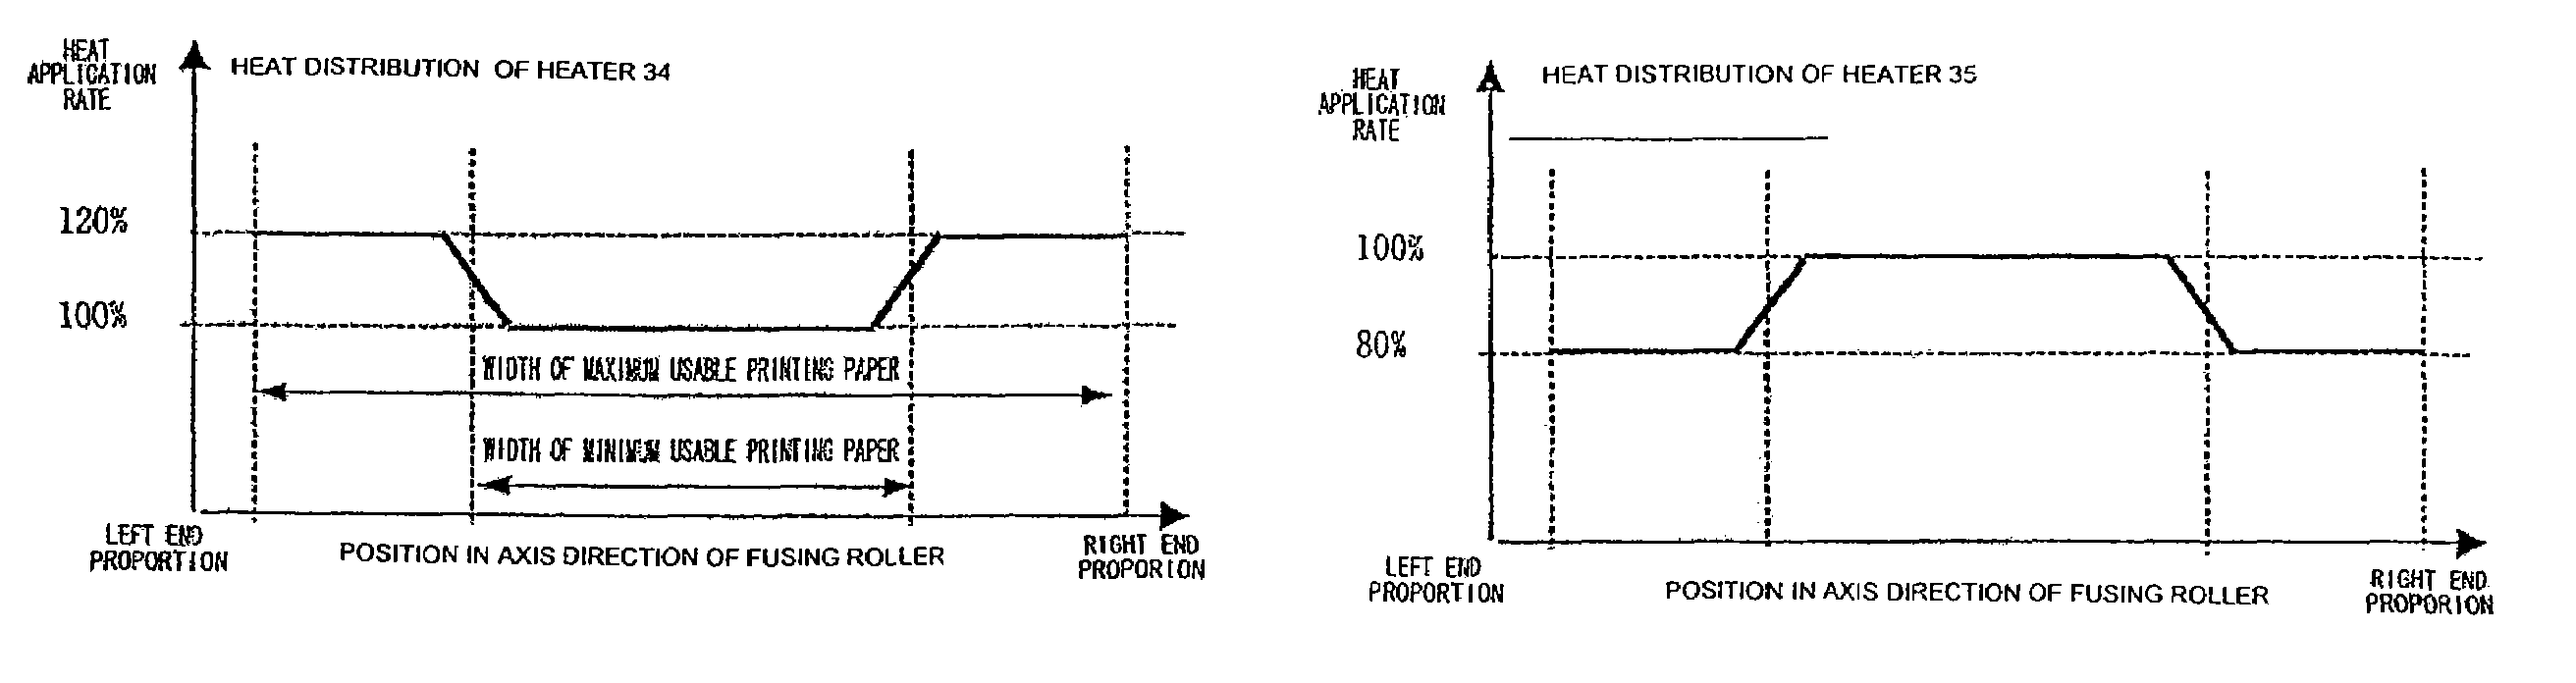 Image recording apparatus including a fusing unit having a plurality of heater members